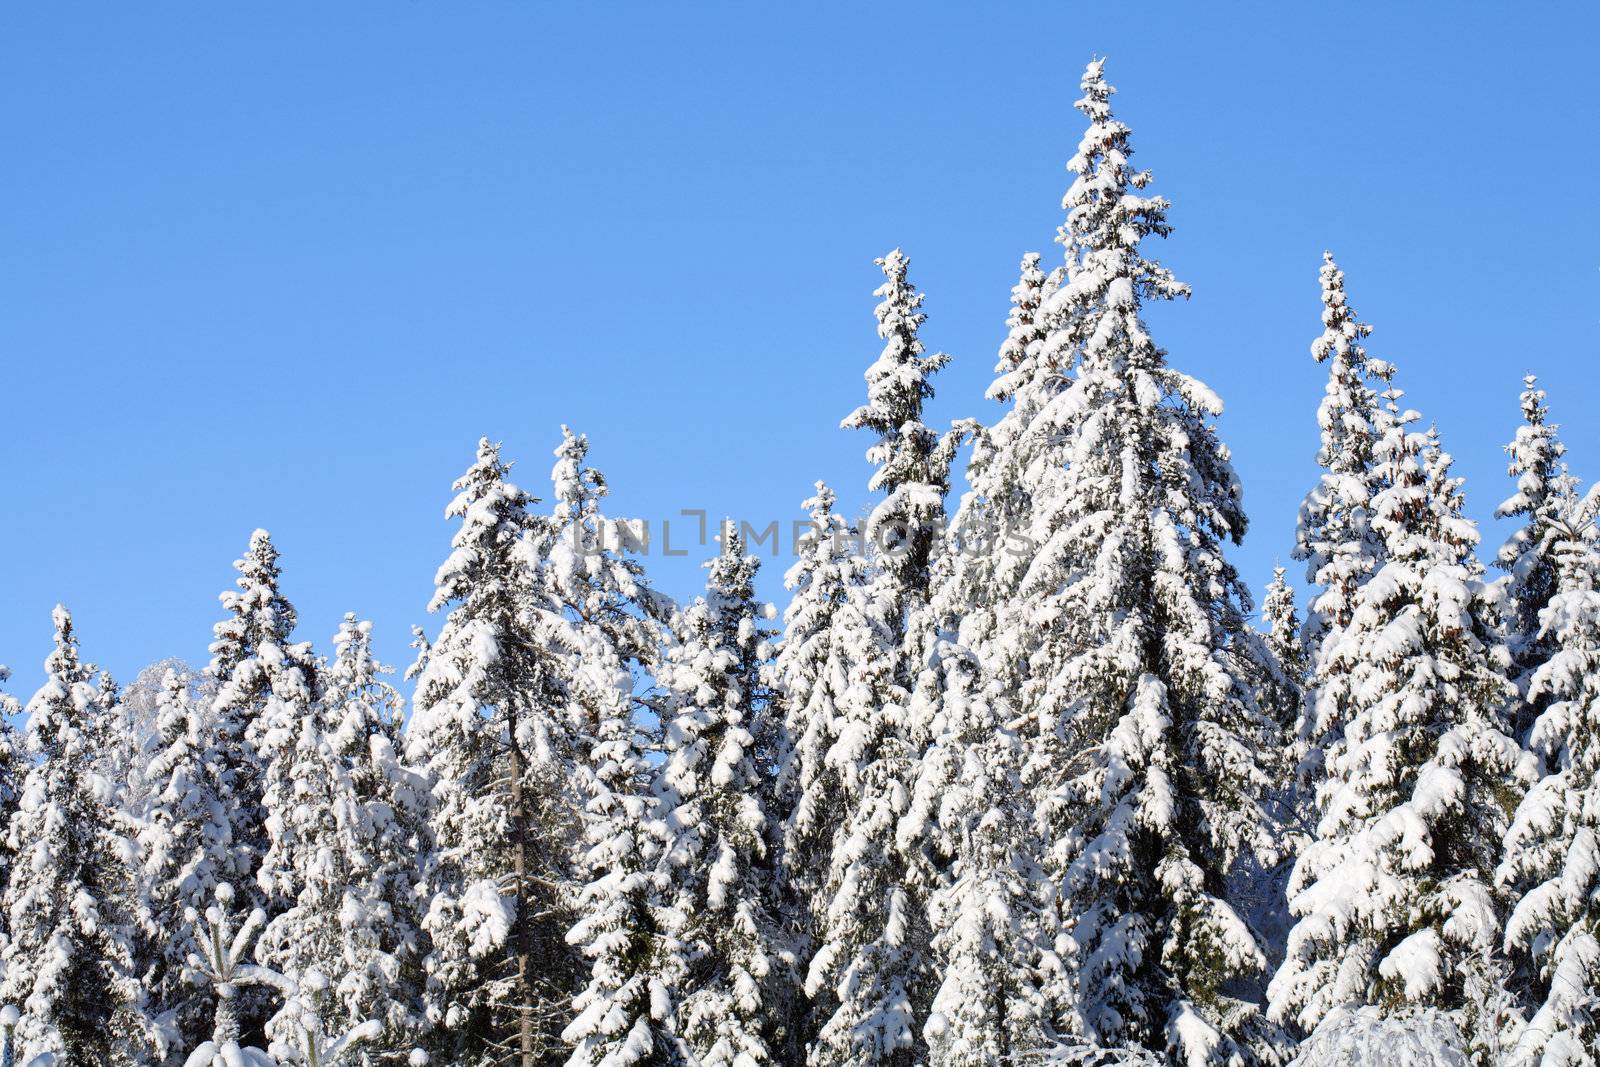 A Spruce forest in winter